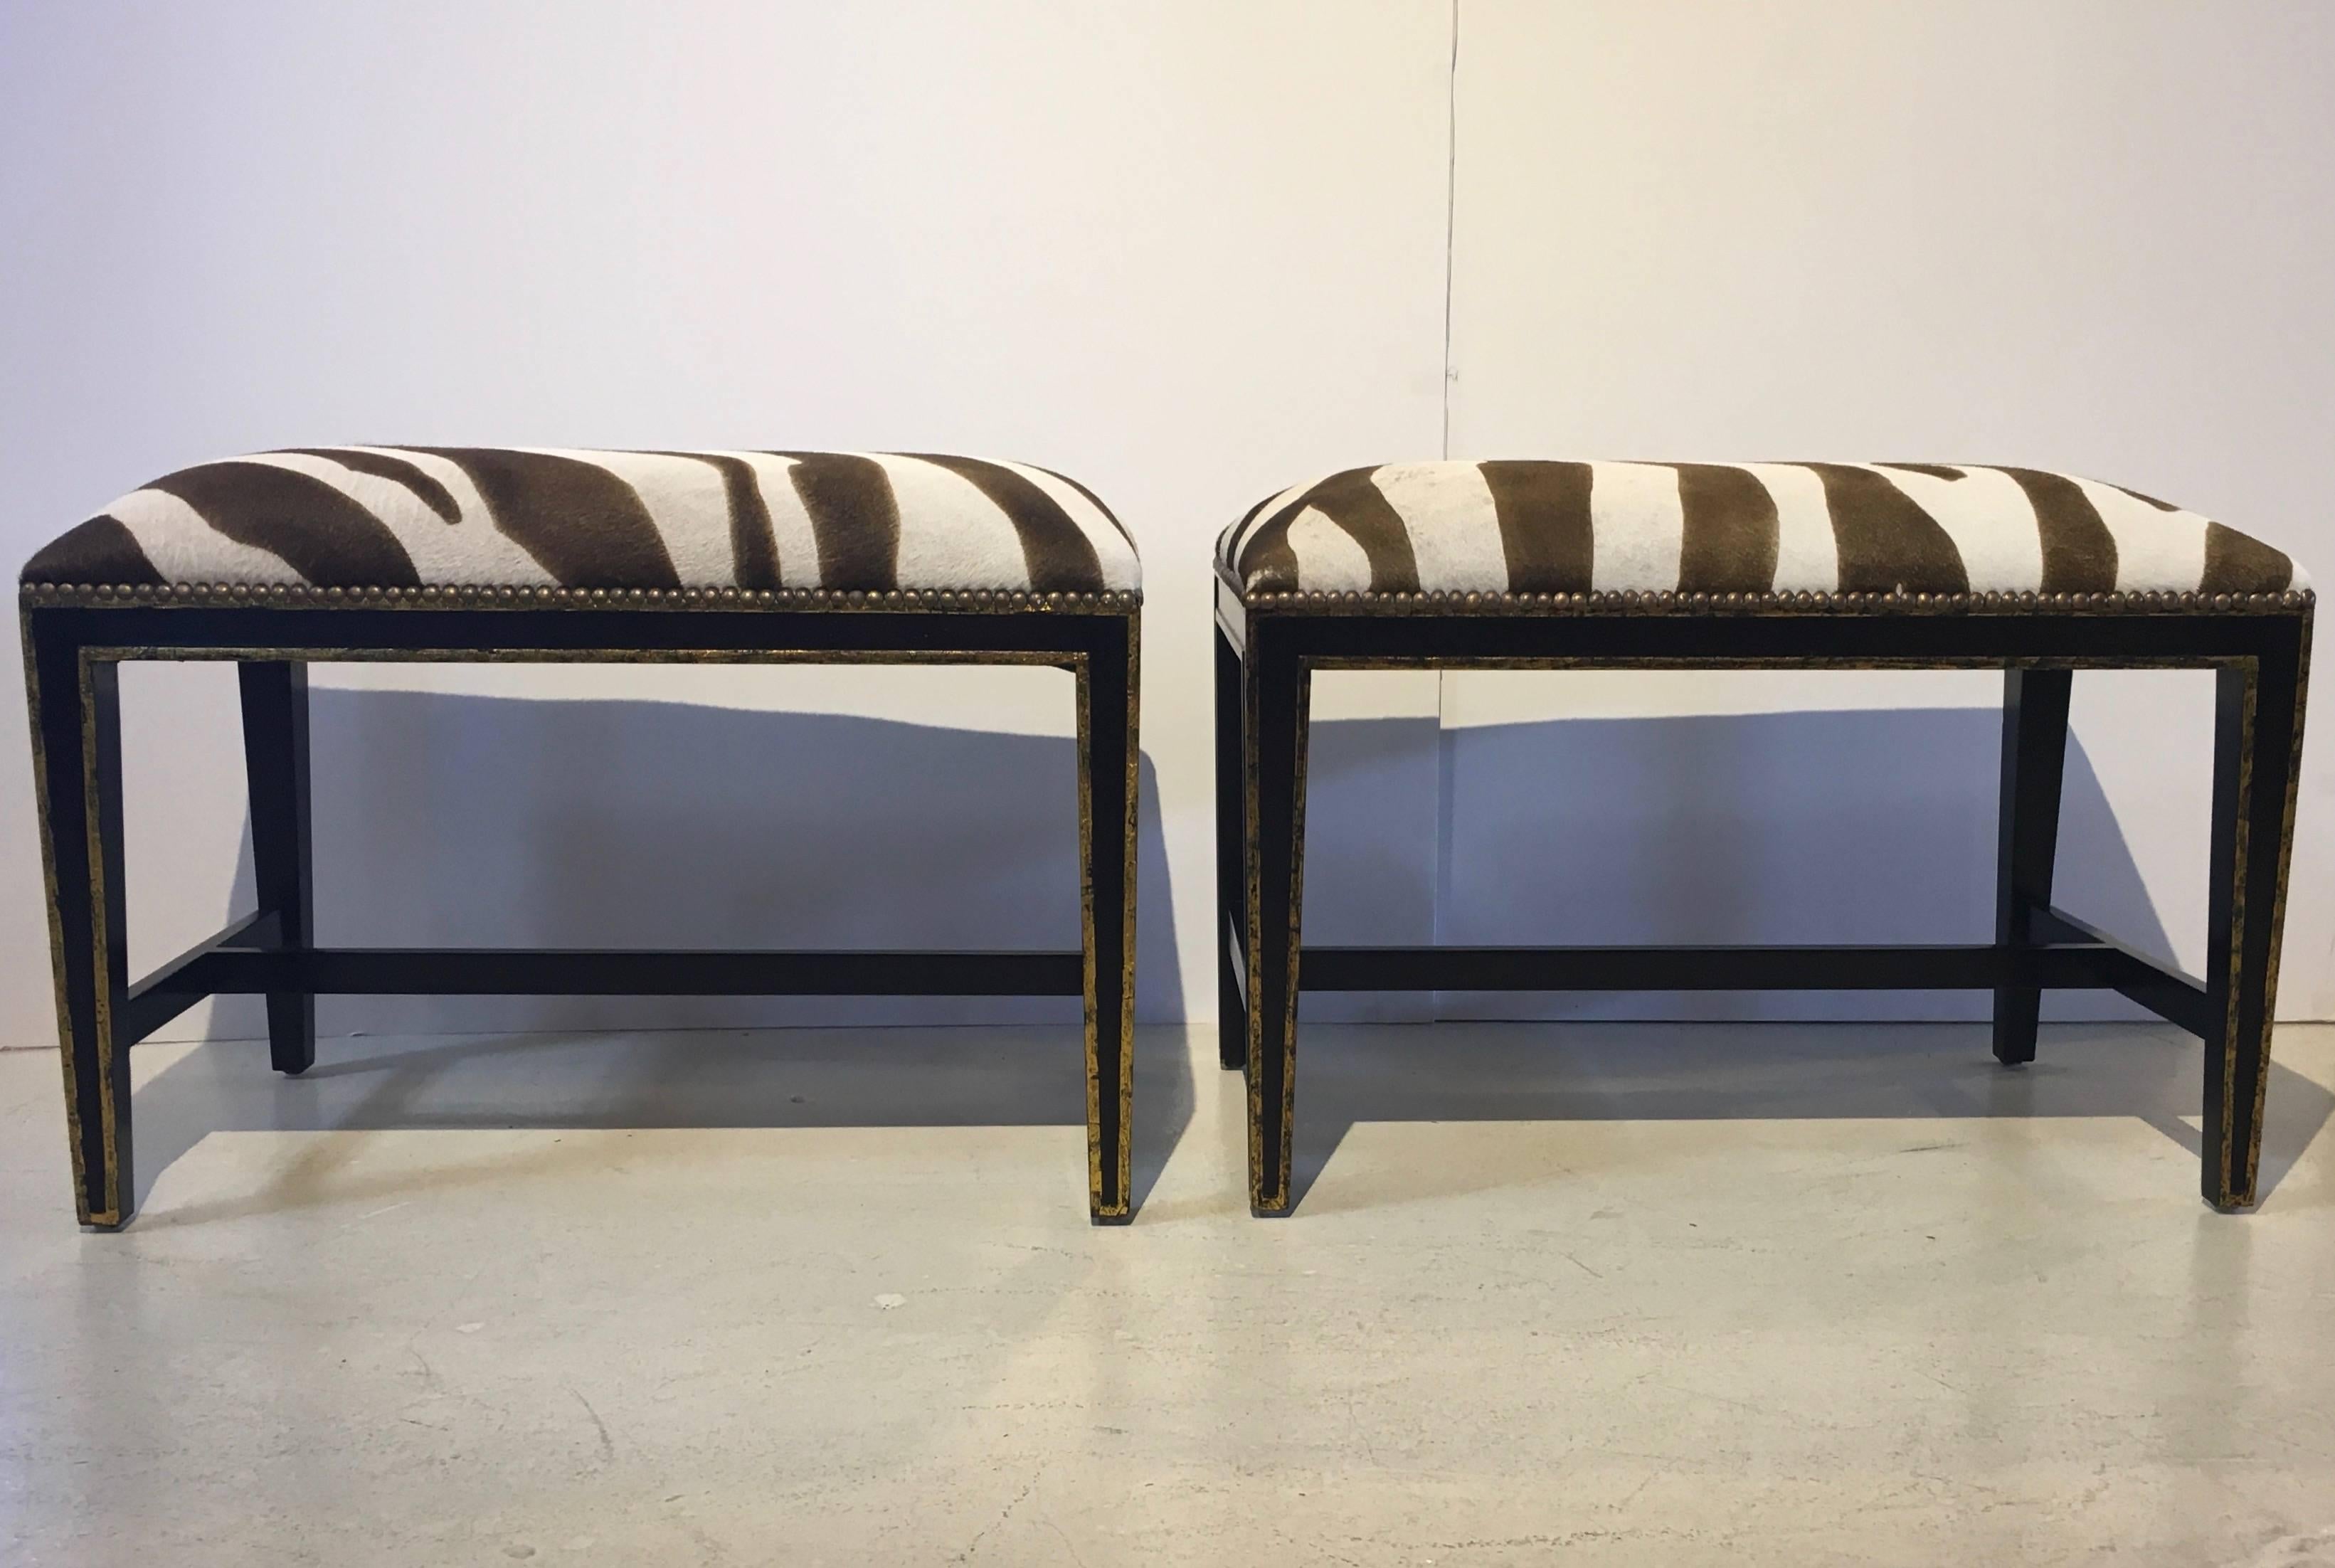 Hollywood Regency Zebra Printed Hide Pair of Ottomans or Benches, with Brass Nailhead Detailing